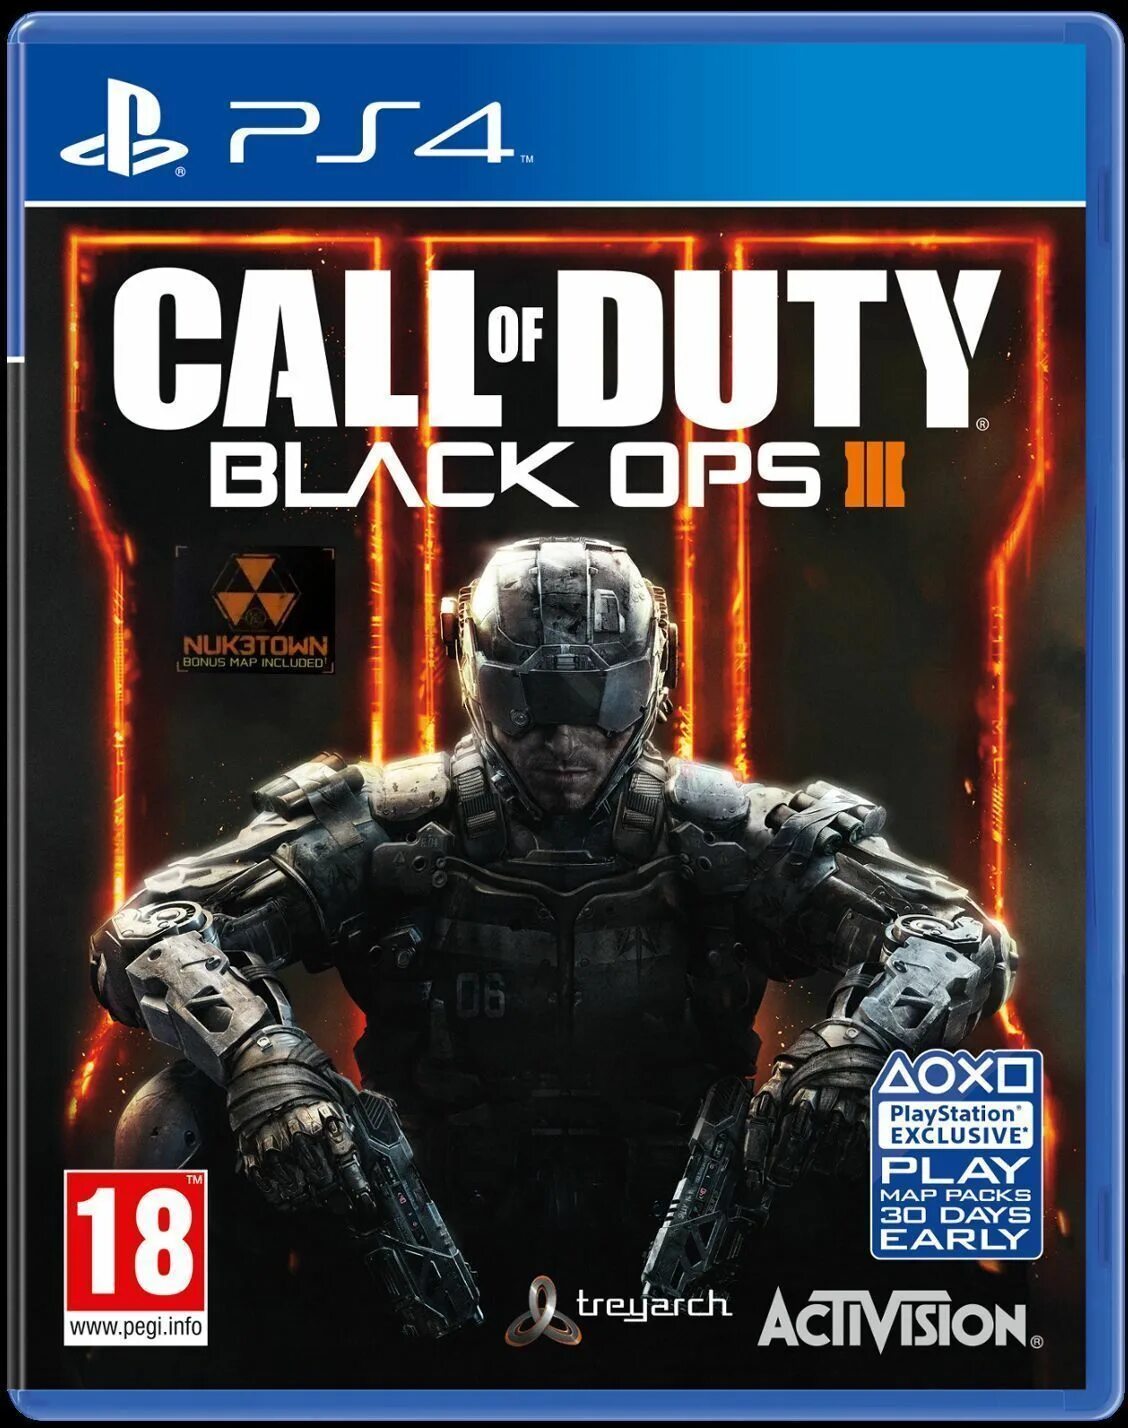 Call of duty ps5 купить. Call of Duty Black ops 3 ps4. Игры на PLAYSTATION 4 Call of Duty. Call of Duty Black ops 4 ps4 диск. PLAYSTATION 4 Call of Duty Black ops 3.